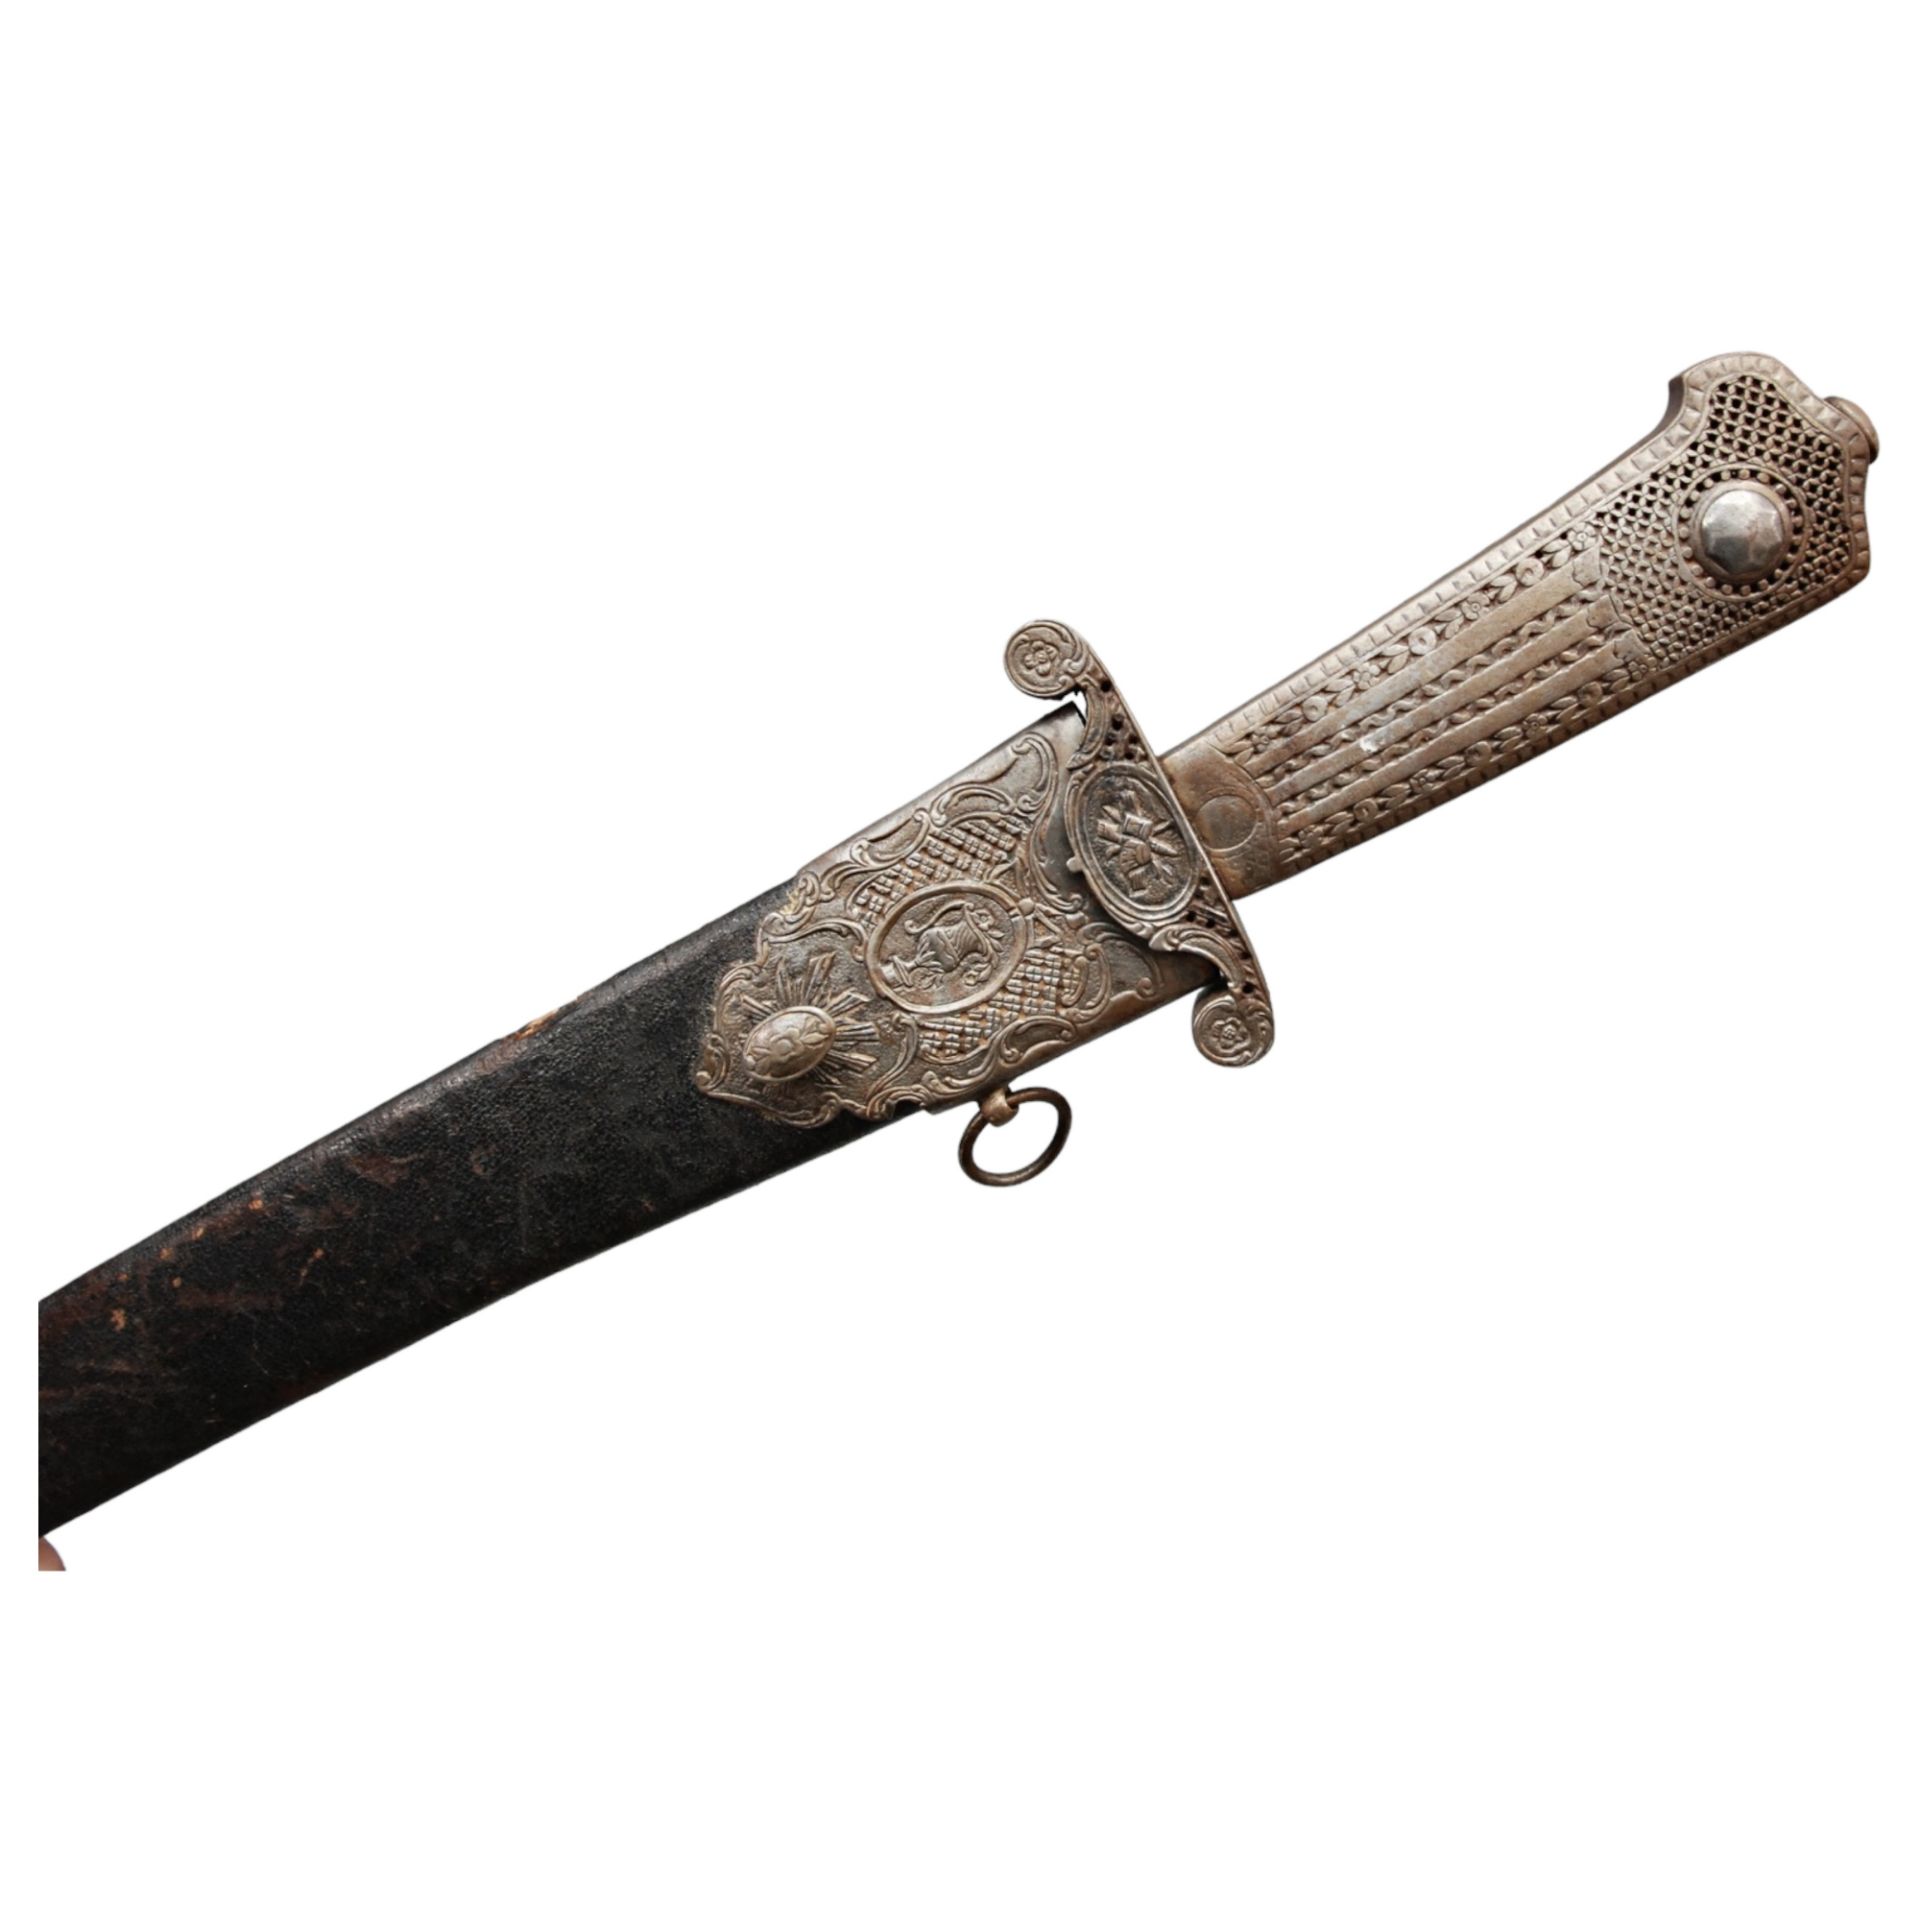 A Hunting dagger, France, second half of the 18th century. - Image 6 of 6